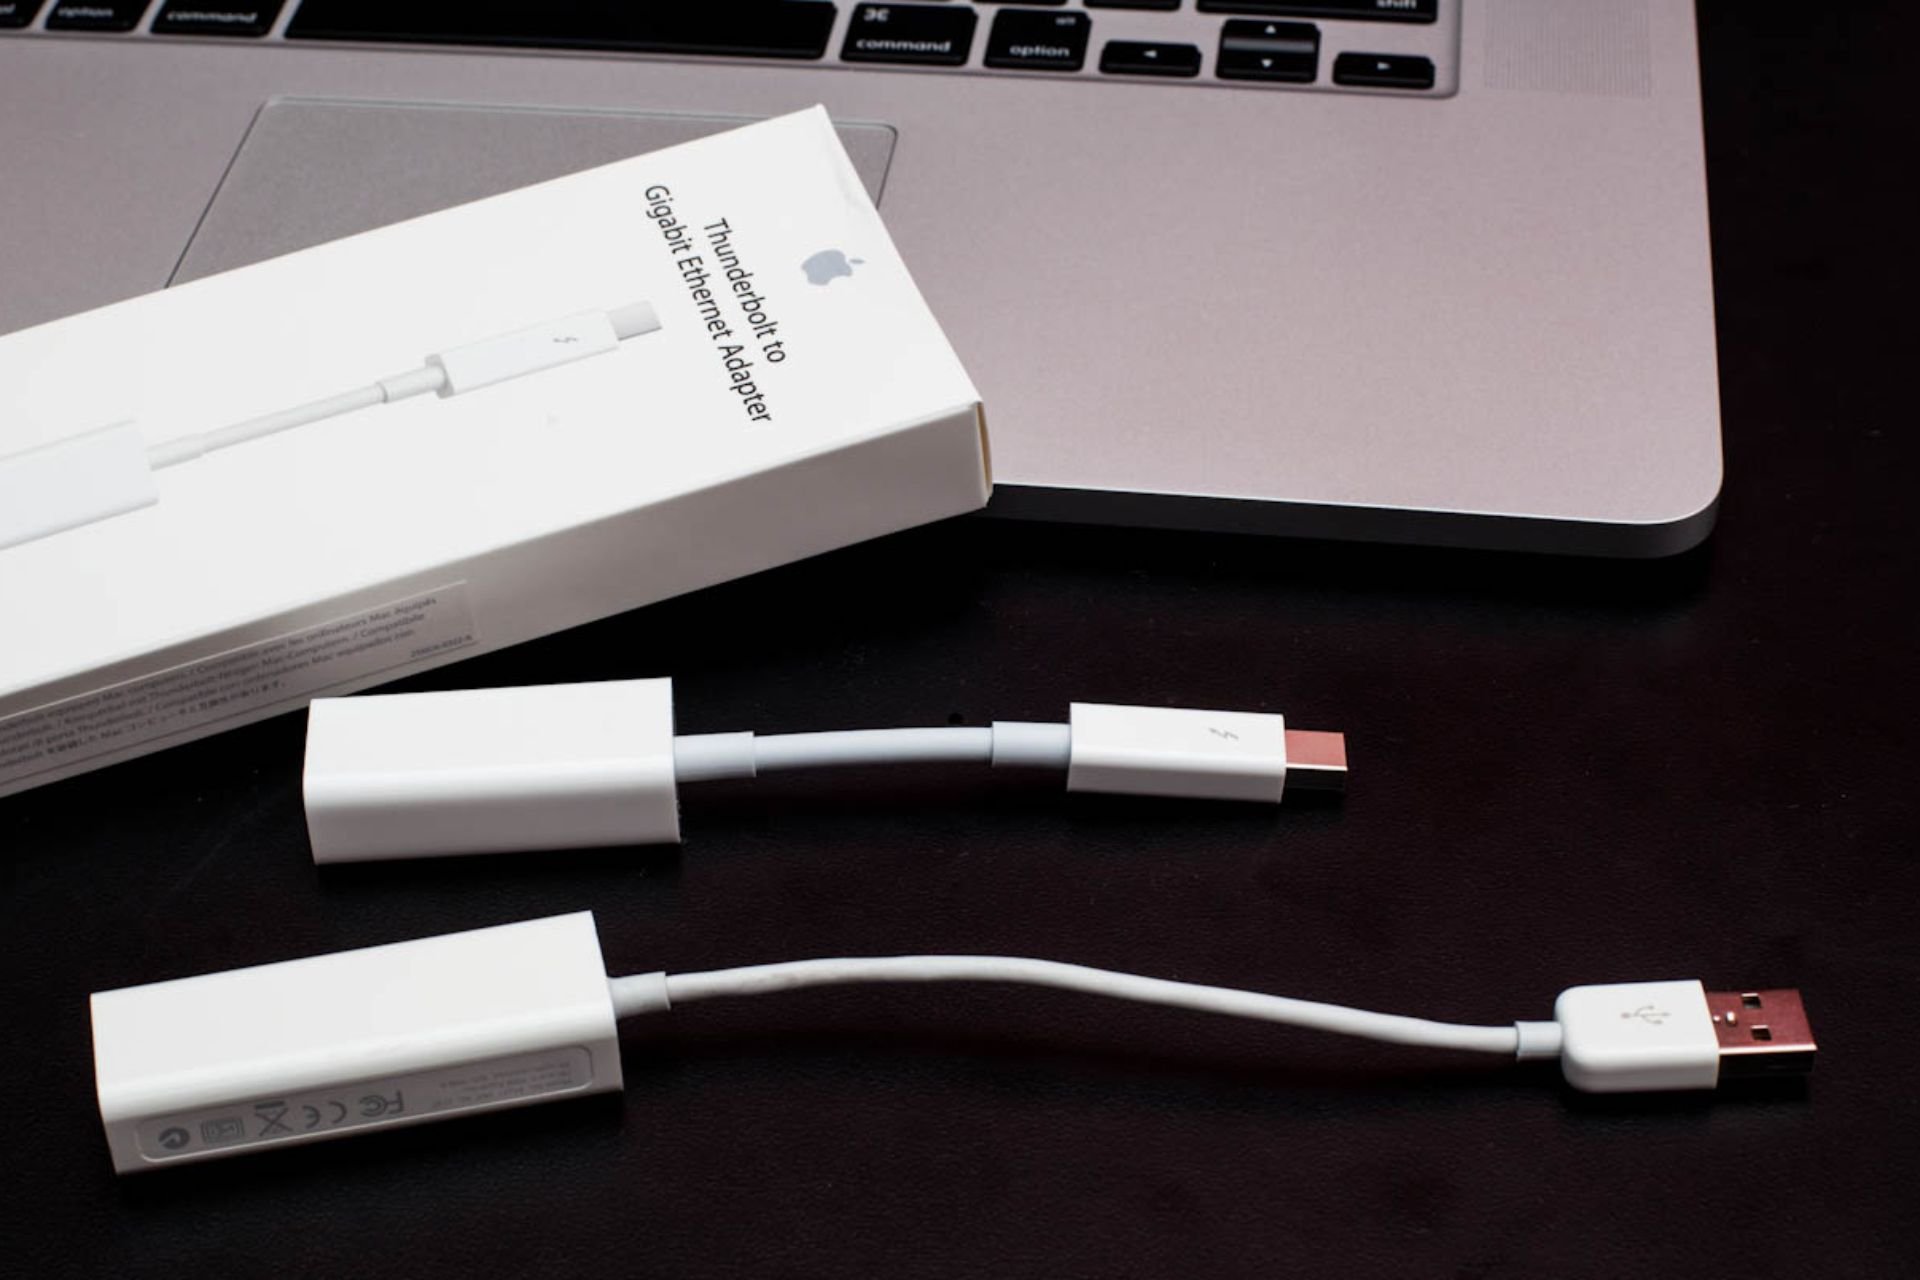 7 Ways to Fix Your Thunderbolt if Is Not Working